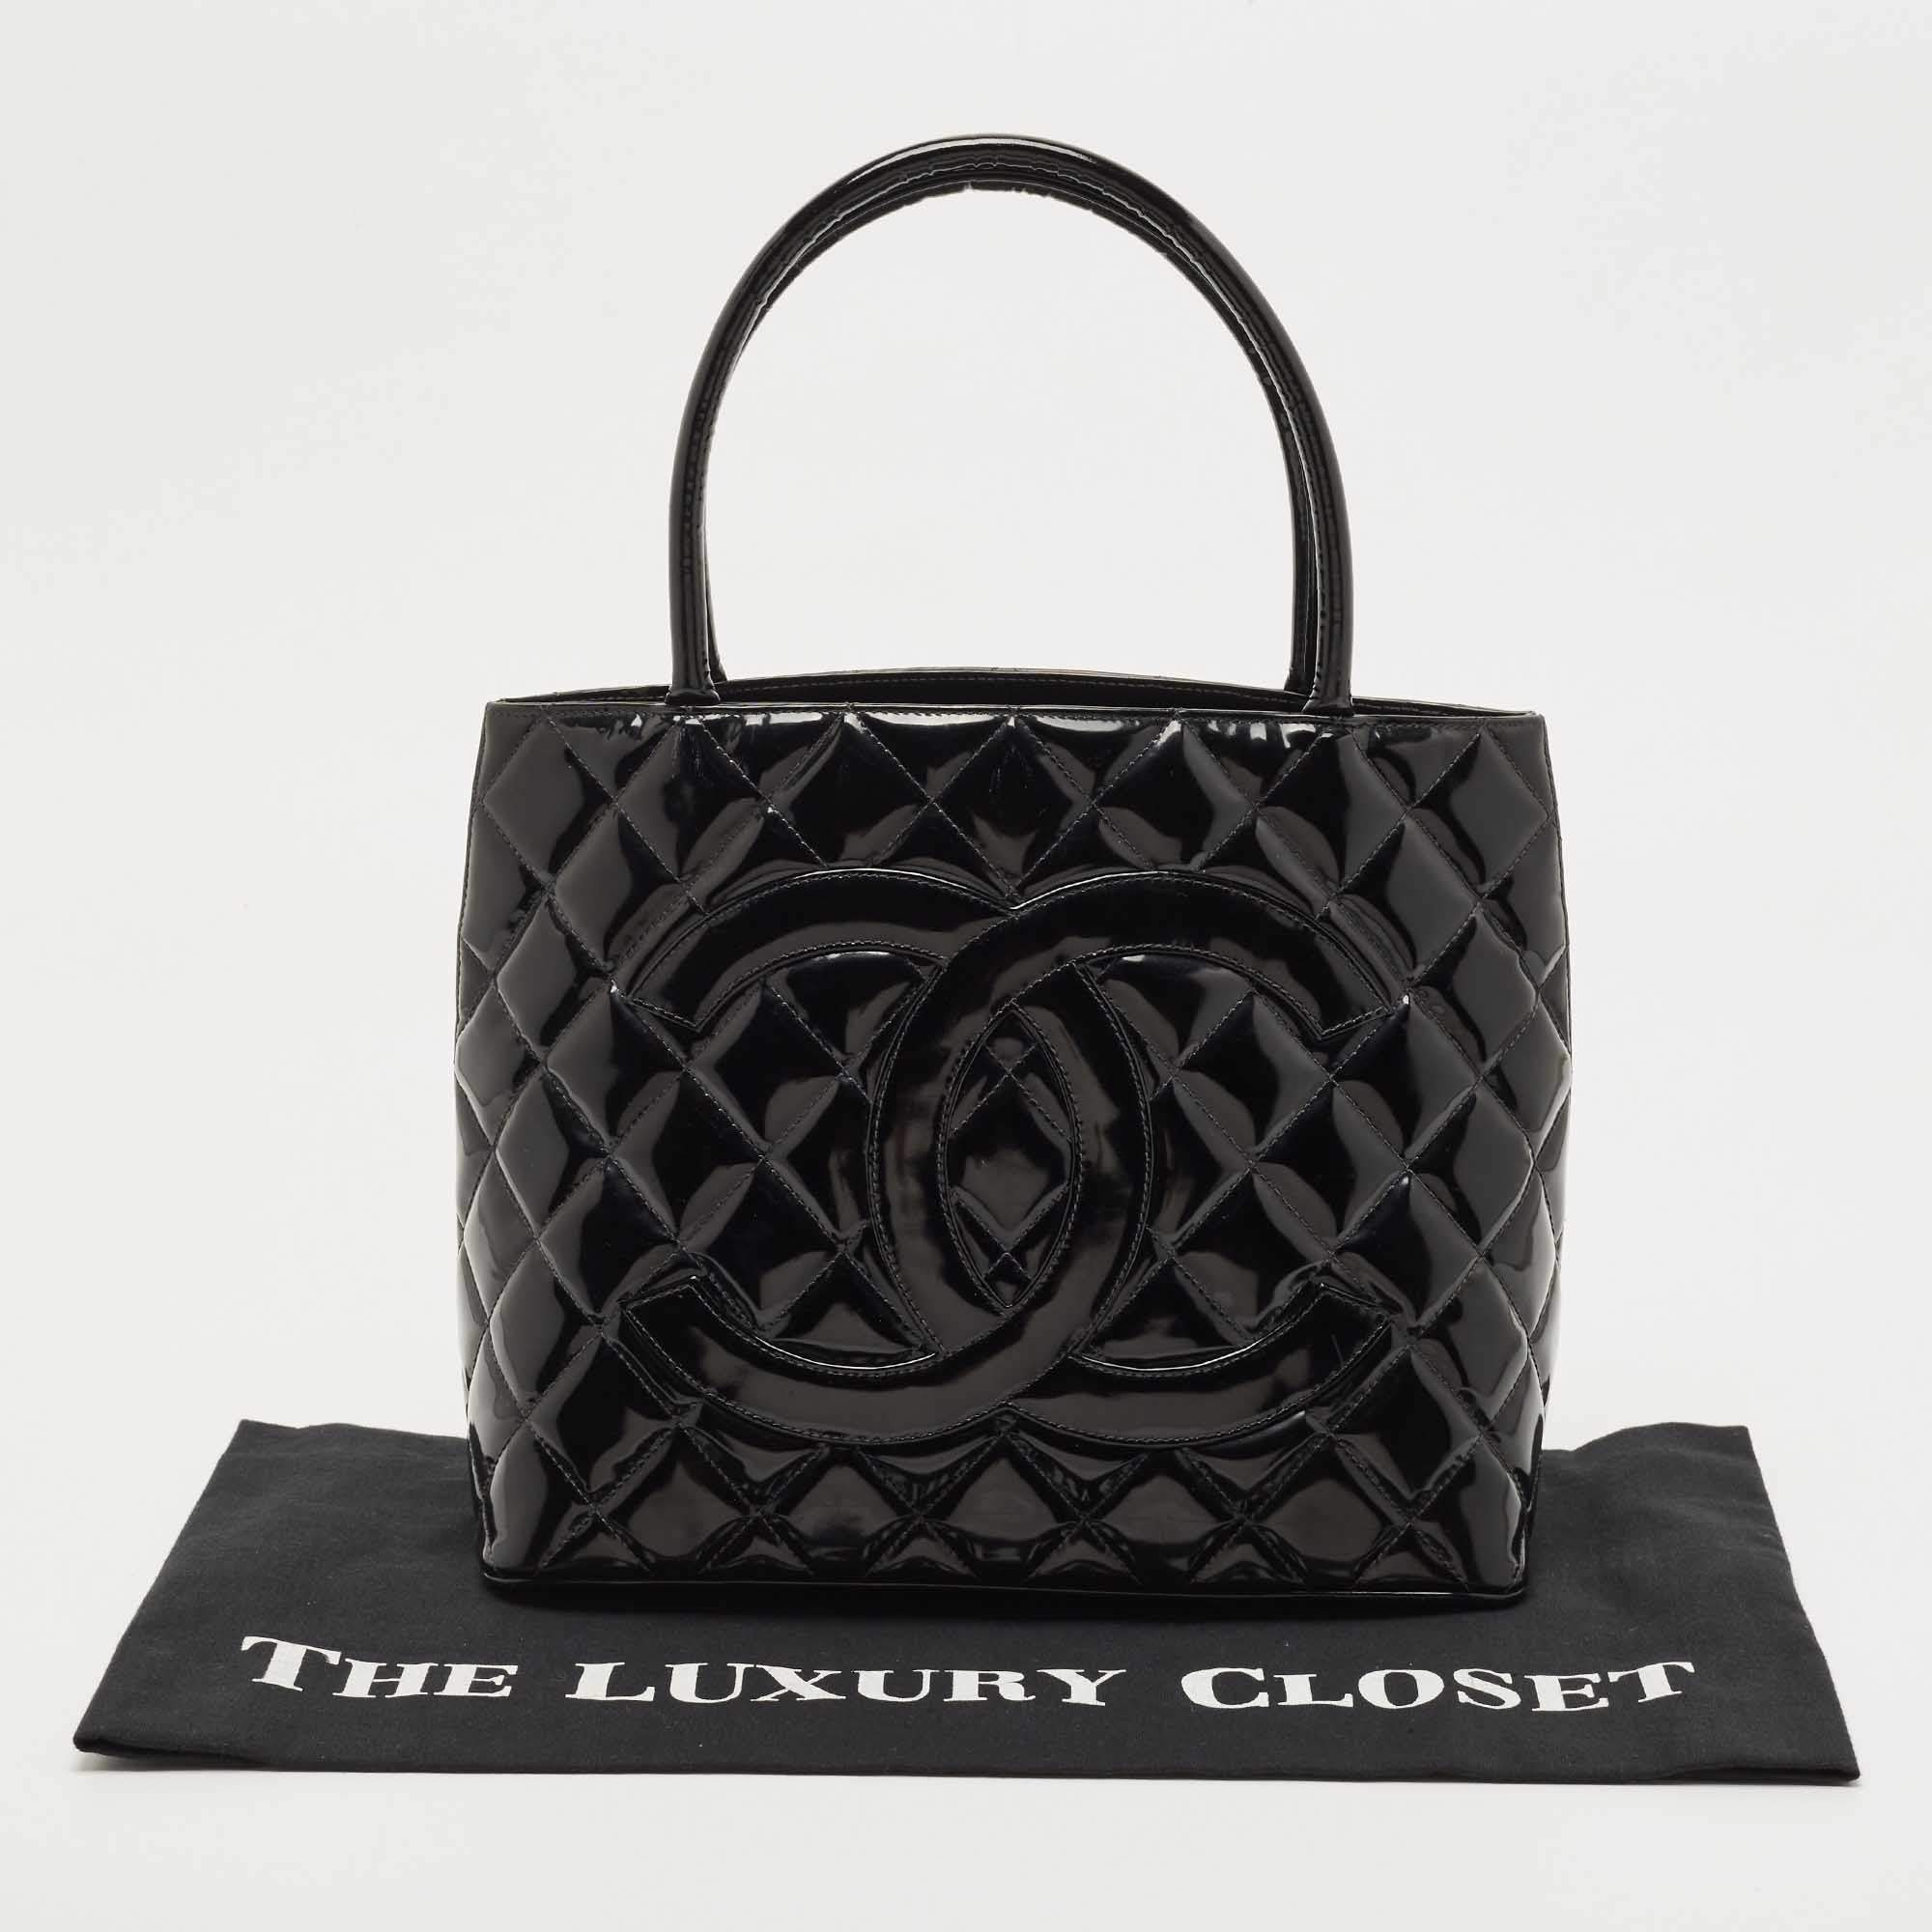 Chanel Black Patent Leather Medallion Tote Bag